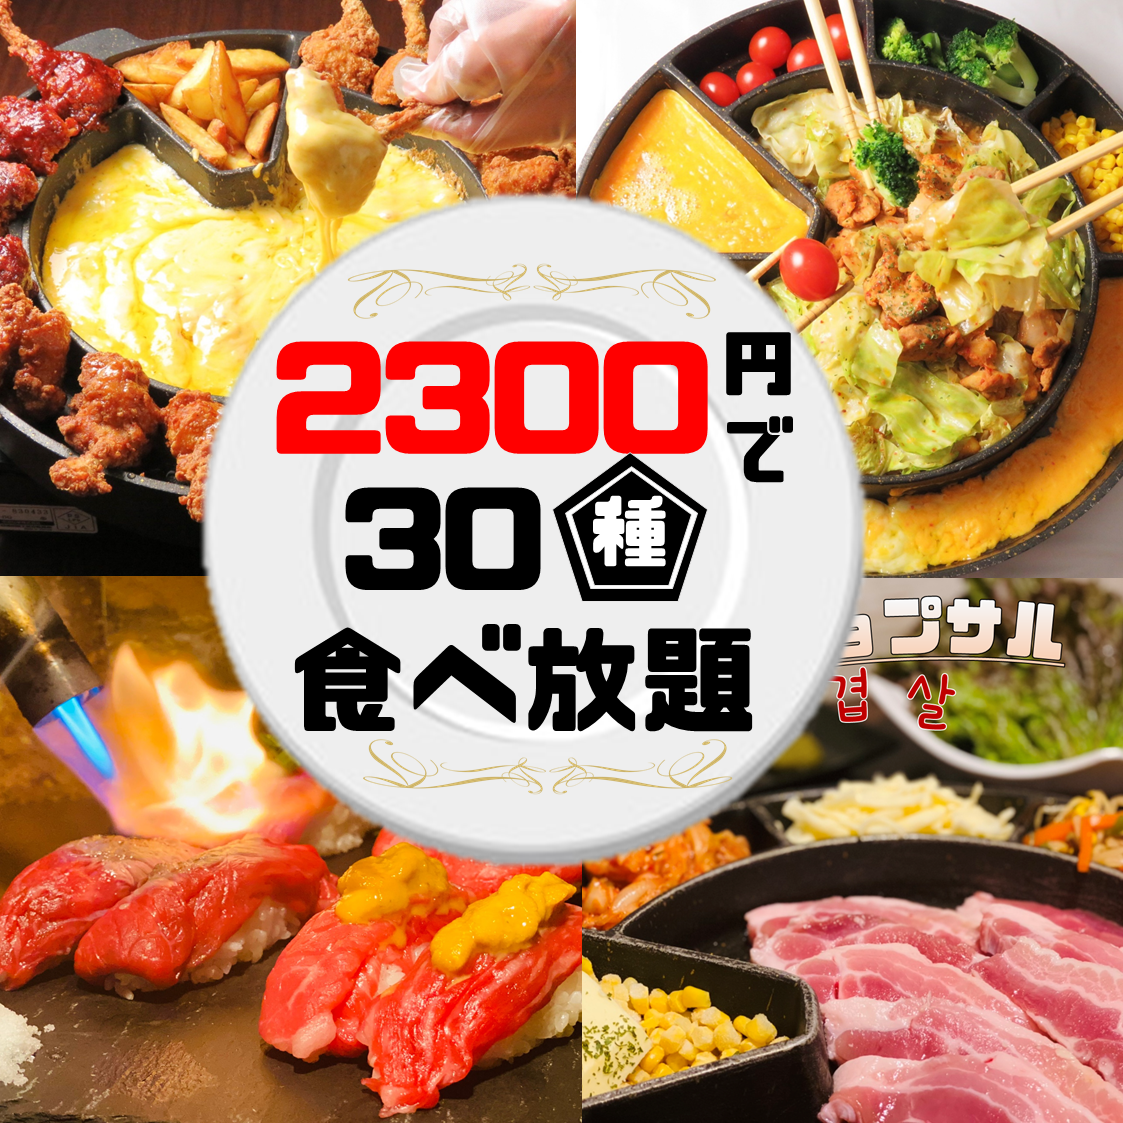 30 kinds, 80 kinds, 100 kinds and abundant all-you-can-eat from 2300 yen ~ ☆